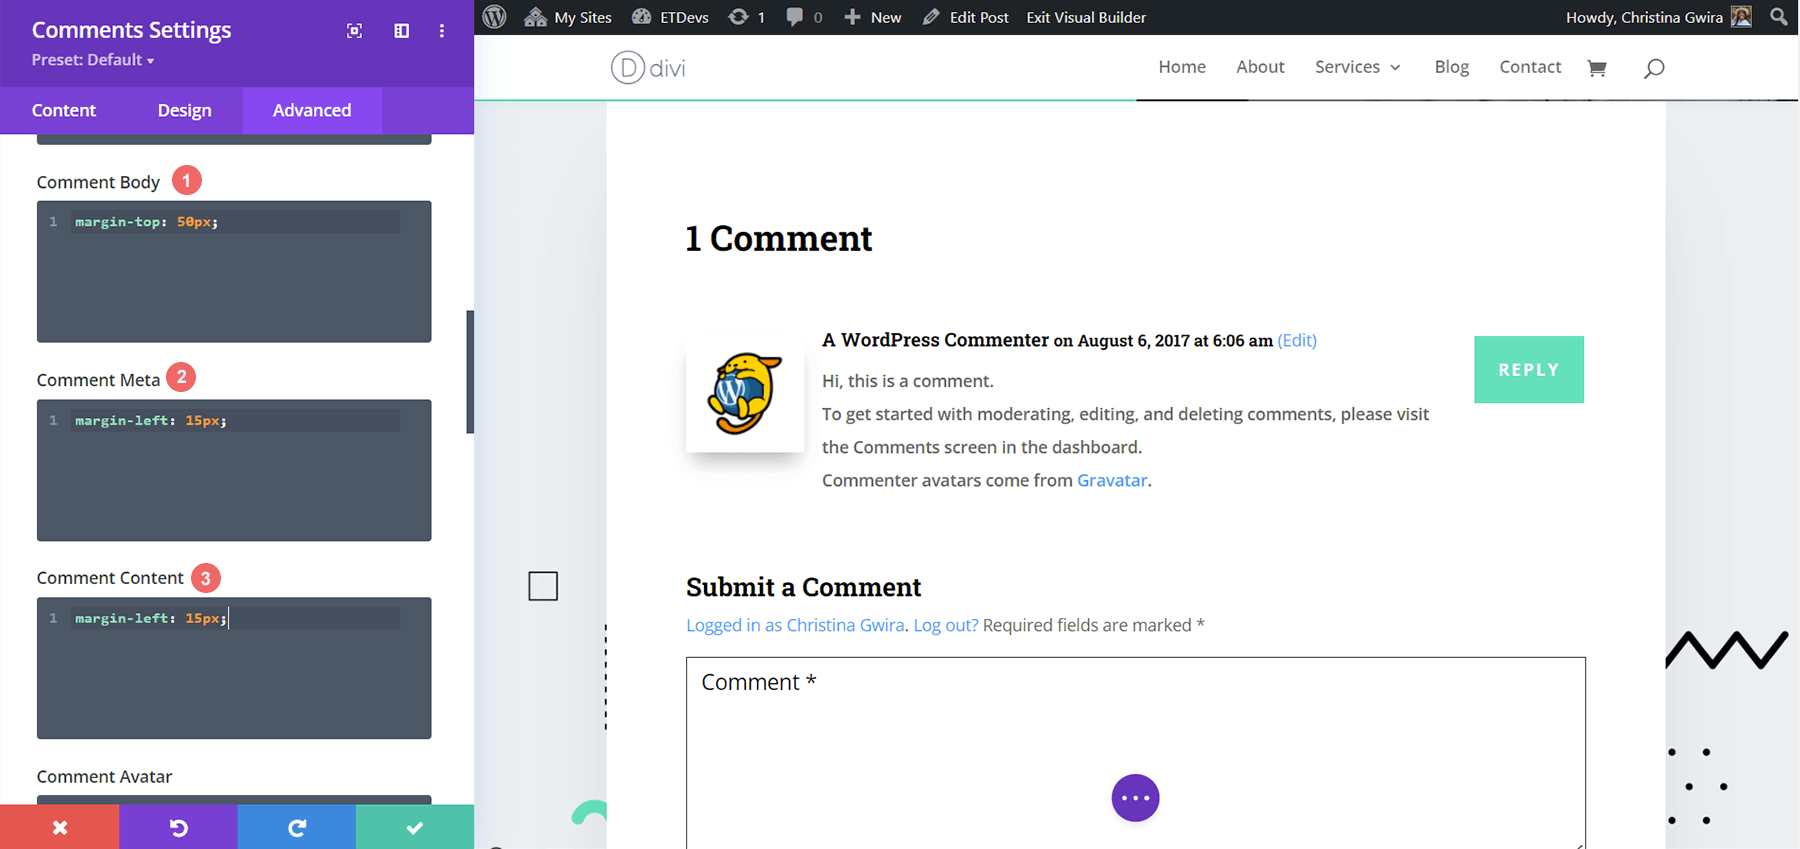 Cleaning up the Comment avatar with custom CSS